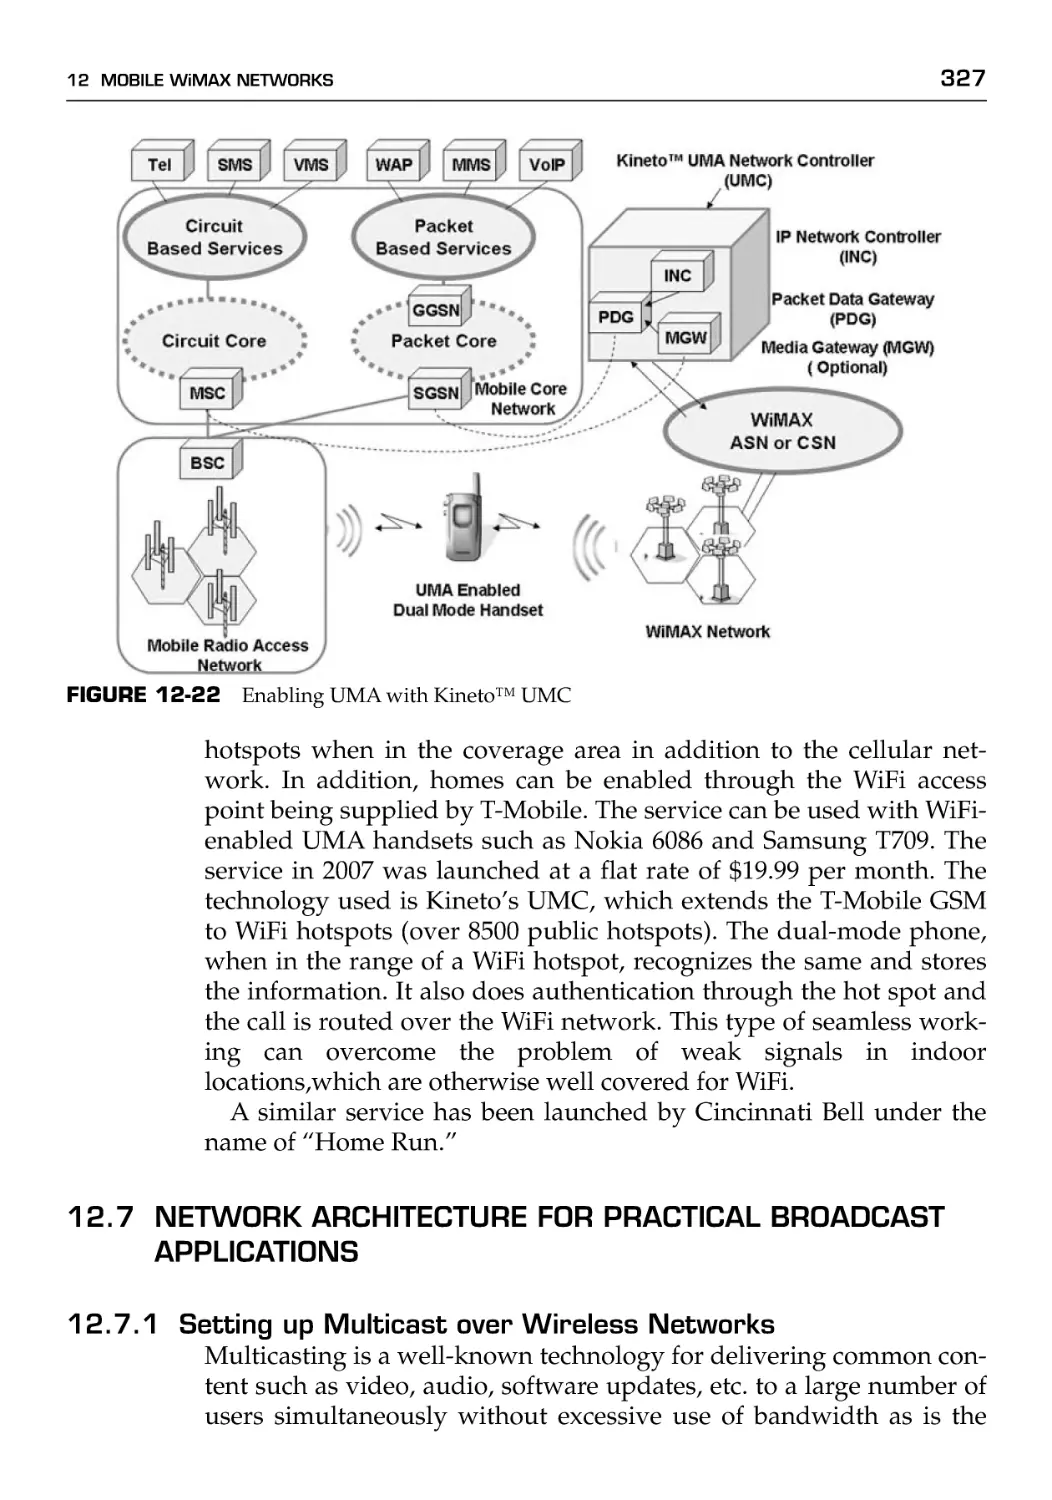 12.7 Network Architecture for Practical Broadcast Applications